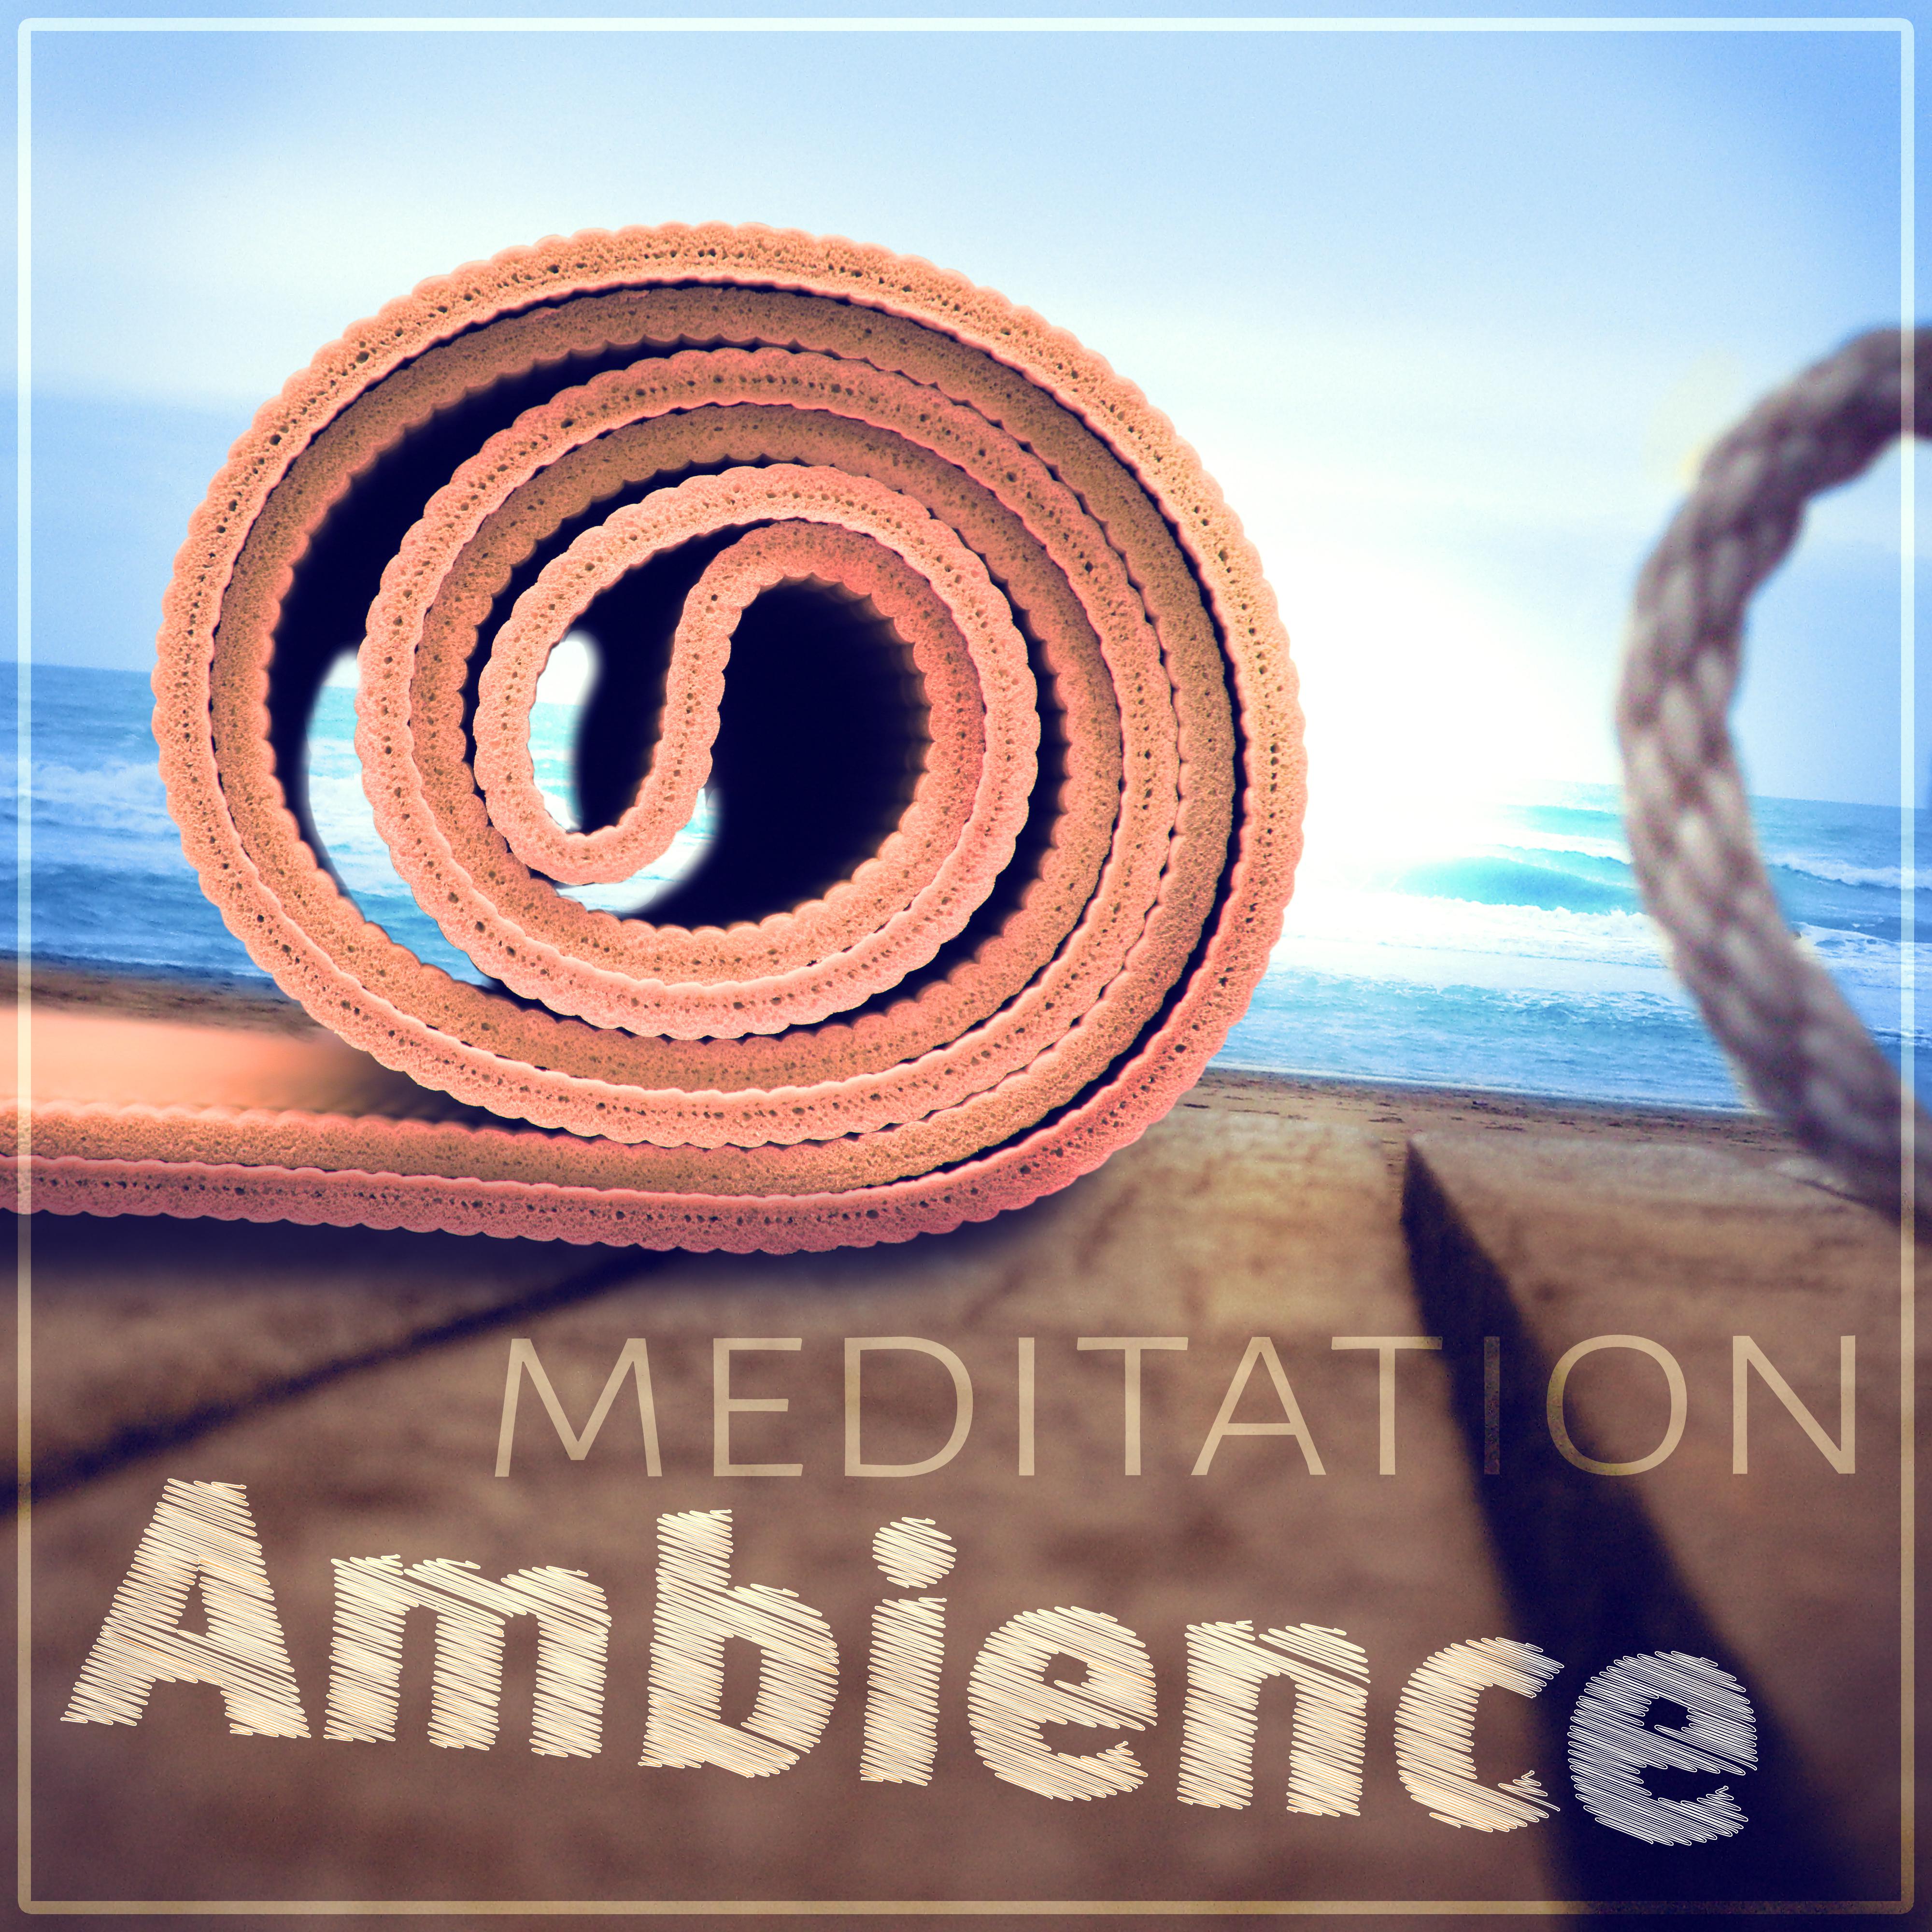 Meditation Ambience  Asian Zen, Relaxing Songs, Mindfulness Meditation, Sounds of Nature, Yoga Exercises, Spa Massage, Natural White Noise